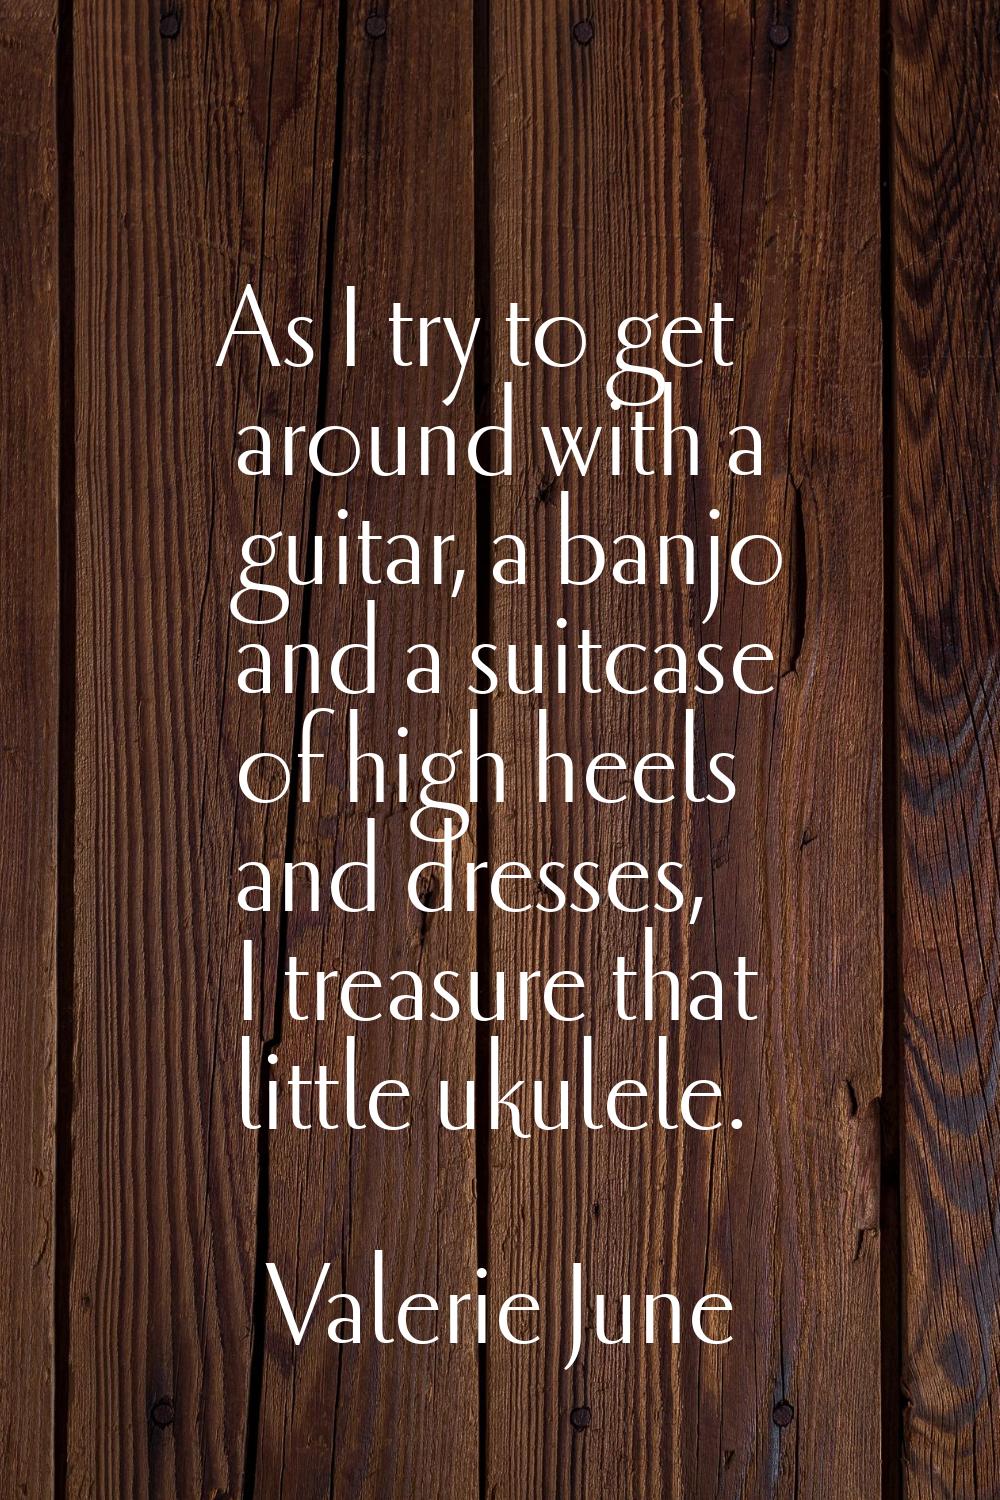 As I try to get around with a guitar, a banjo and a suitcase of high heels and dresses, I treasure 